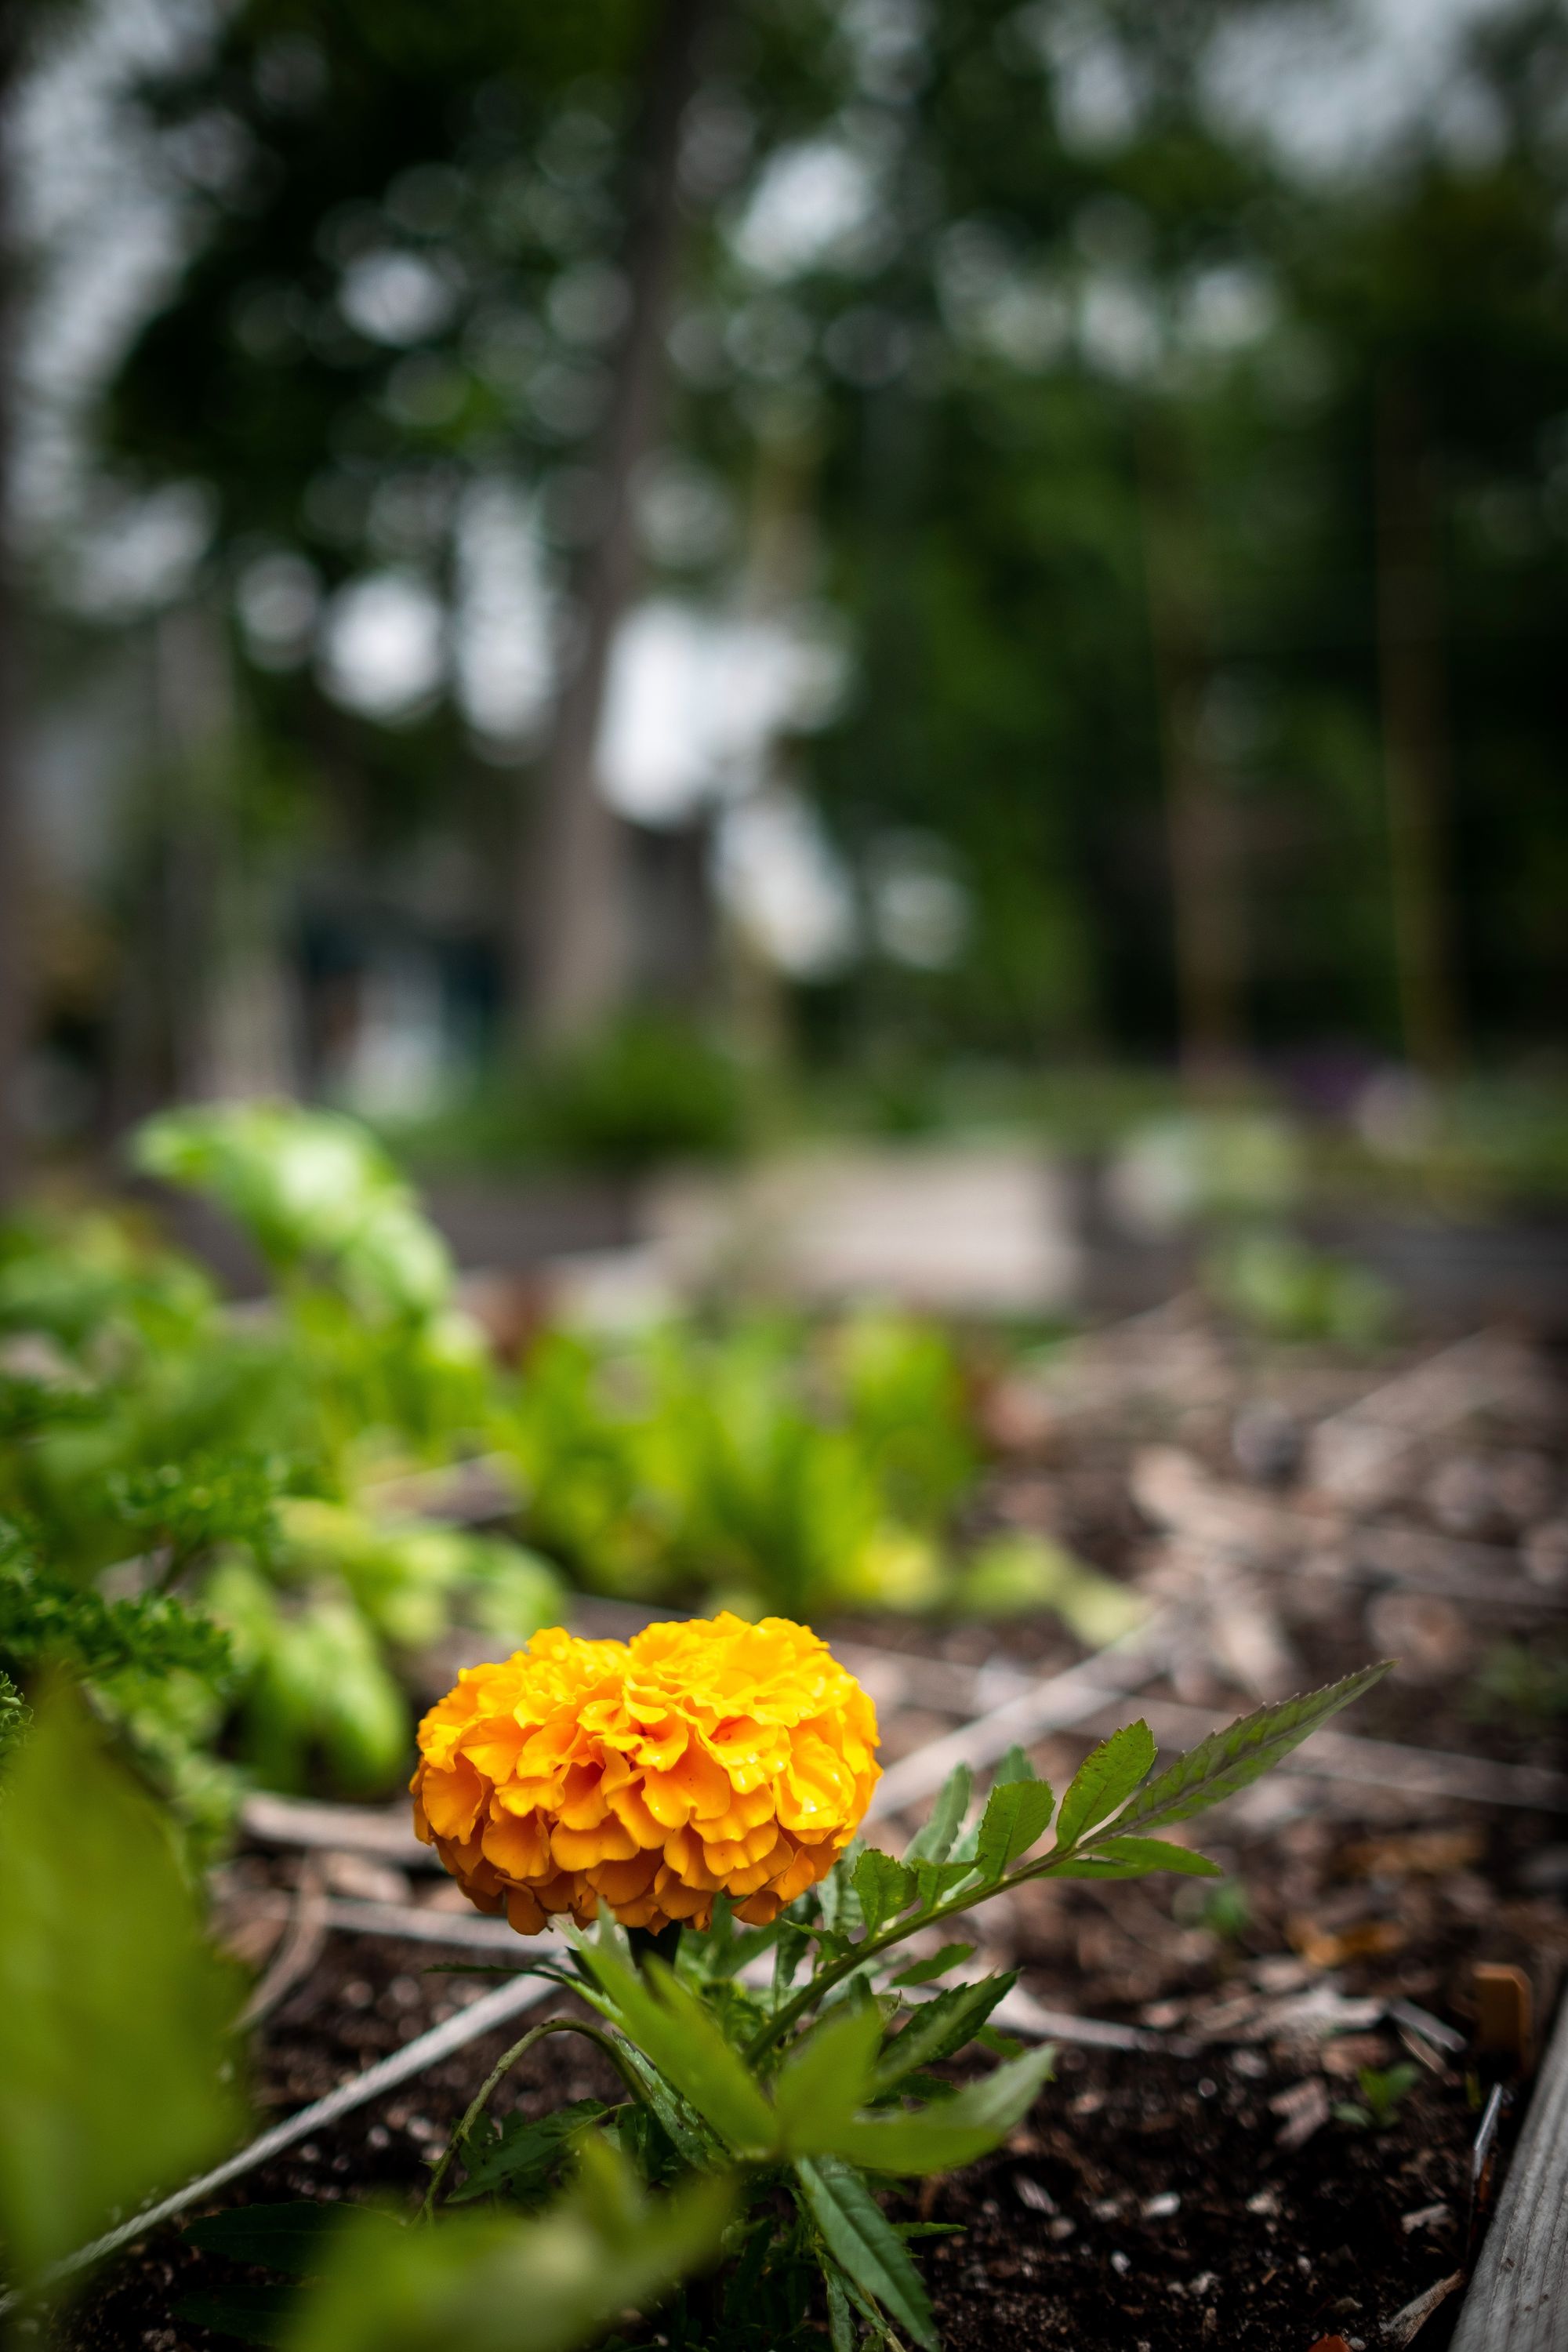 A Marigold growing in a raised garden bed.